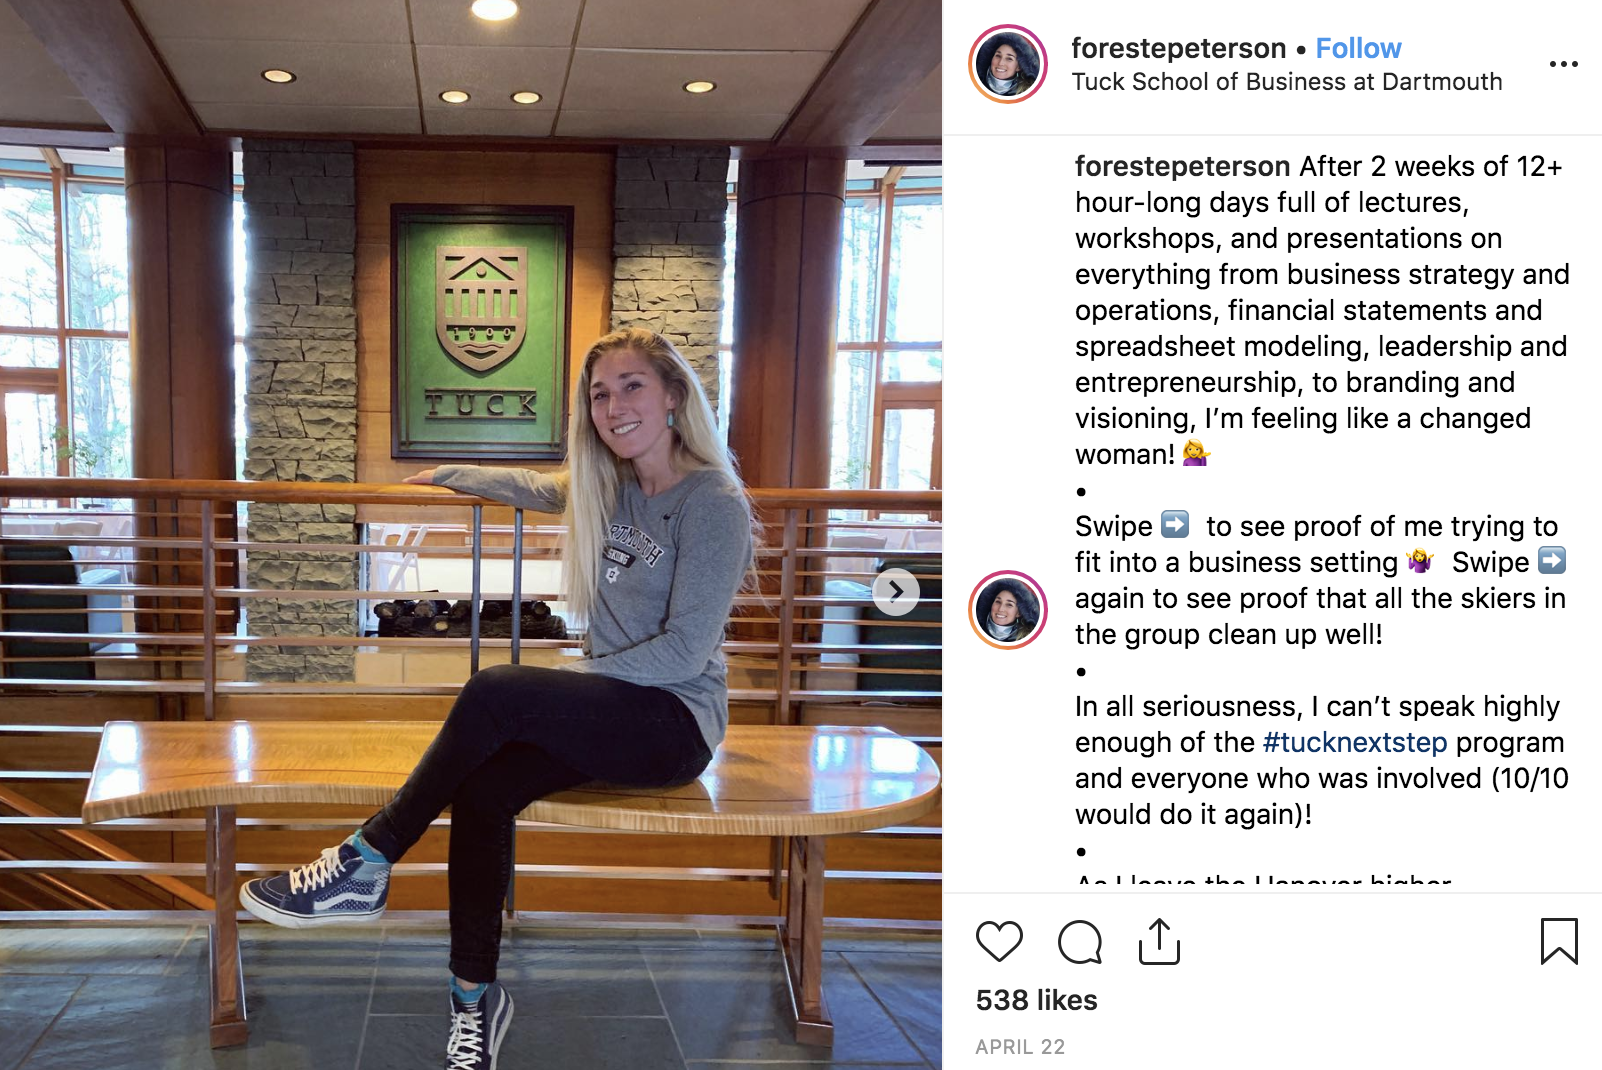 Foreste Peterson reflects on her Tuck experience